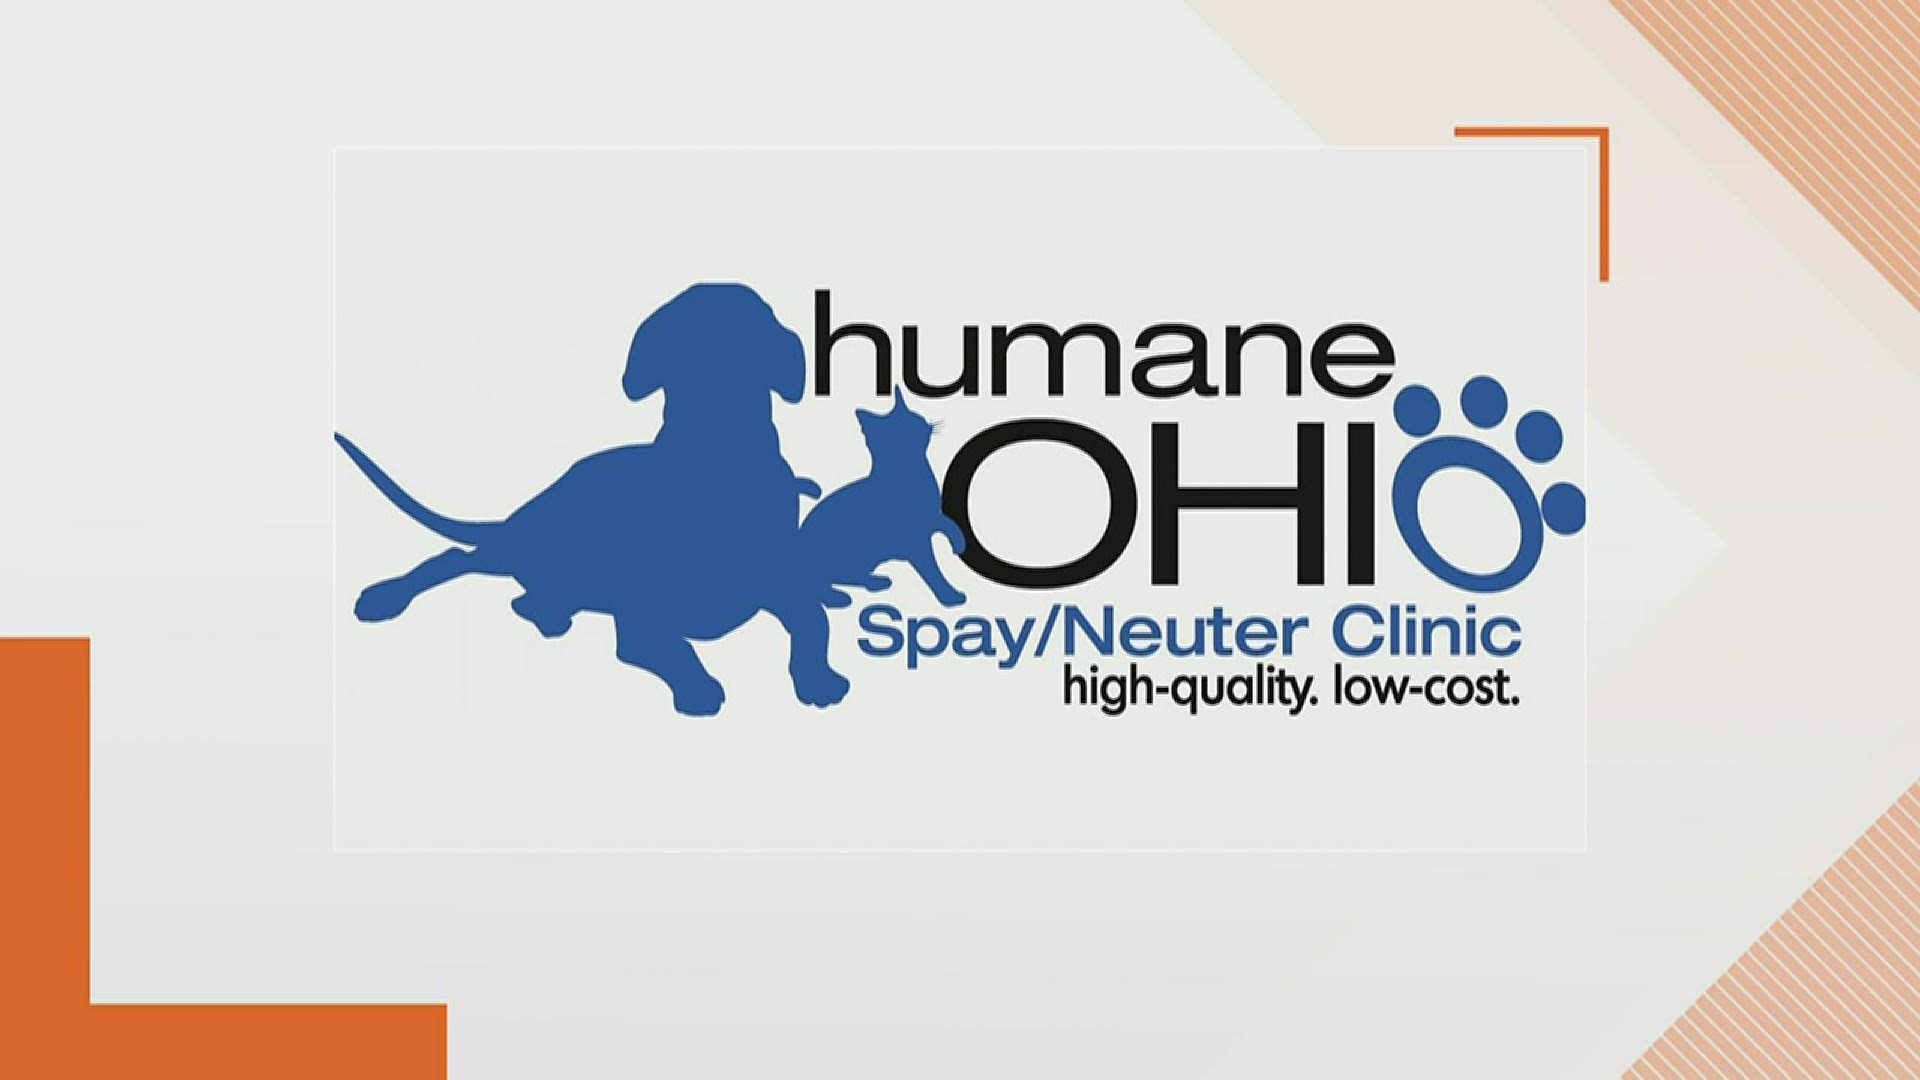 On Wednesdays and Fridays, Humane Ohio is now accepting walk-in appointments.